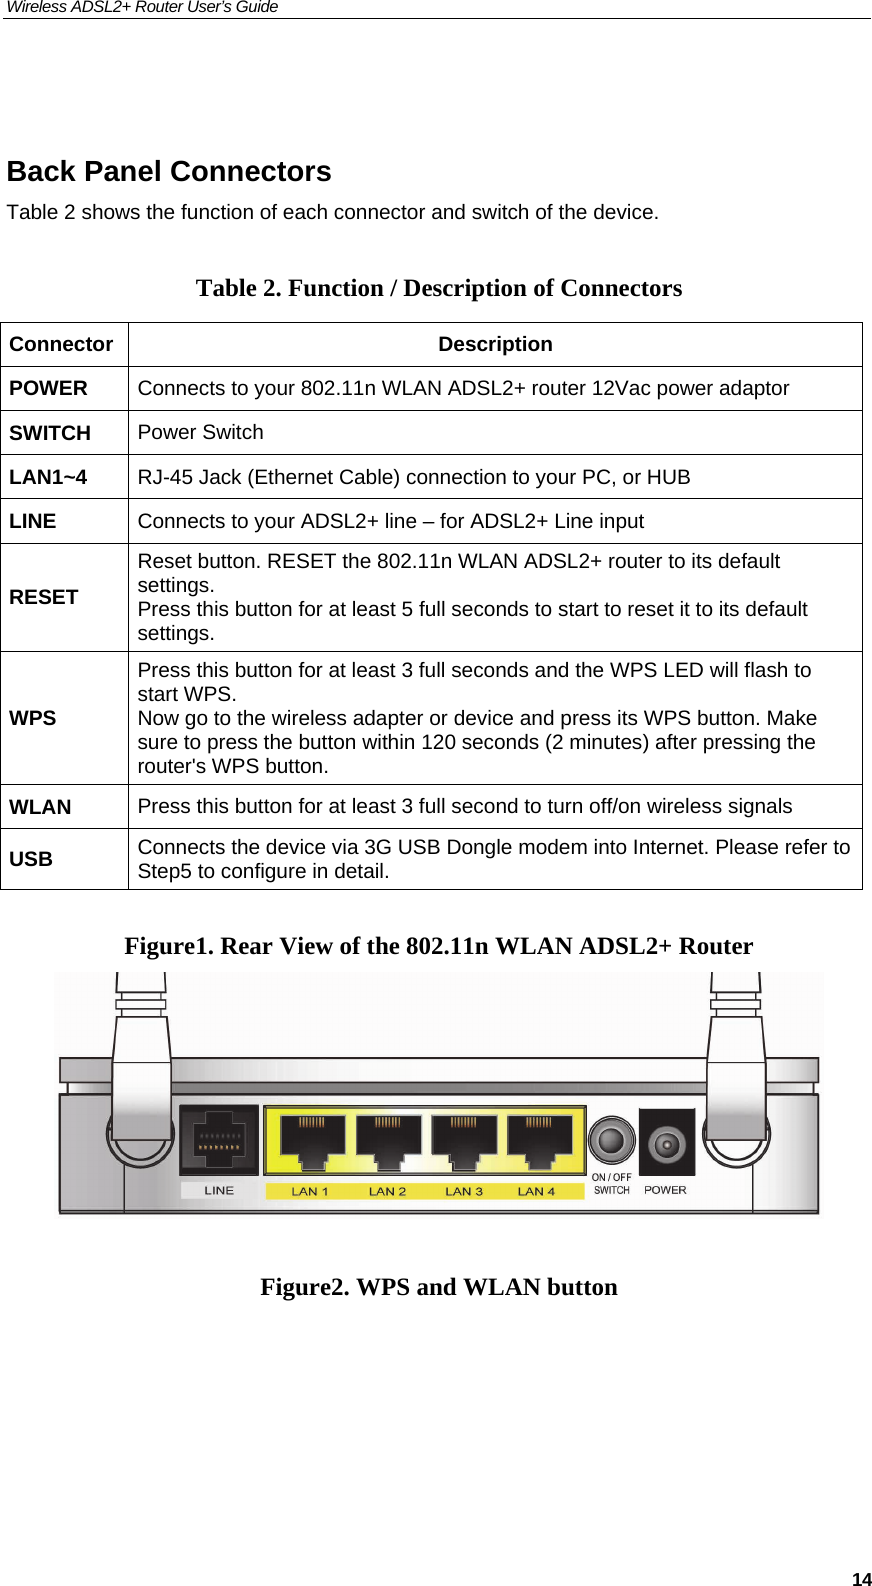 Wireless ADSL2+ Router User’s Guide     14    Back Panel Connectors Table 2 shows the function of each connector and switch of the device.  Table 2. Function / Description of Connectors Connector Description POWER  Connects to your 802.11n WLAN ADSL2+ router 12Vac power adaptor SWITCH  Power Switch LAN1~4  RJ-45 Jack (Ethernet Cable) connection to your PC, or HUB LINE  Connects to your ADSL2+ line – for ADSL2+ Line input RESET Reset button. RESET the 802.11n WLAN ADSL2+ router to its default settings. Press this button for at least 5 full seconds to start to reset it to its default settings. WPS Press this button for at least 3 full seconds and the WPS LED will flash to start WPS. Now go to the wireless adapter or device and press its WPS button. Make sure to press the button within 120 seconds (2 minutes) after pressing the router&apos;s WPS button. WLAN  Press this button for at least 3 full second to turn off/on wireless signals USB  Connects the device via 3G USB Dongle modem into Internet. Please refer to Step5 to configure in detail.  Figure1. Rear View of the 802.11n WLAN ADSL2+ Router   Figure2. WPS and WLAN button 